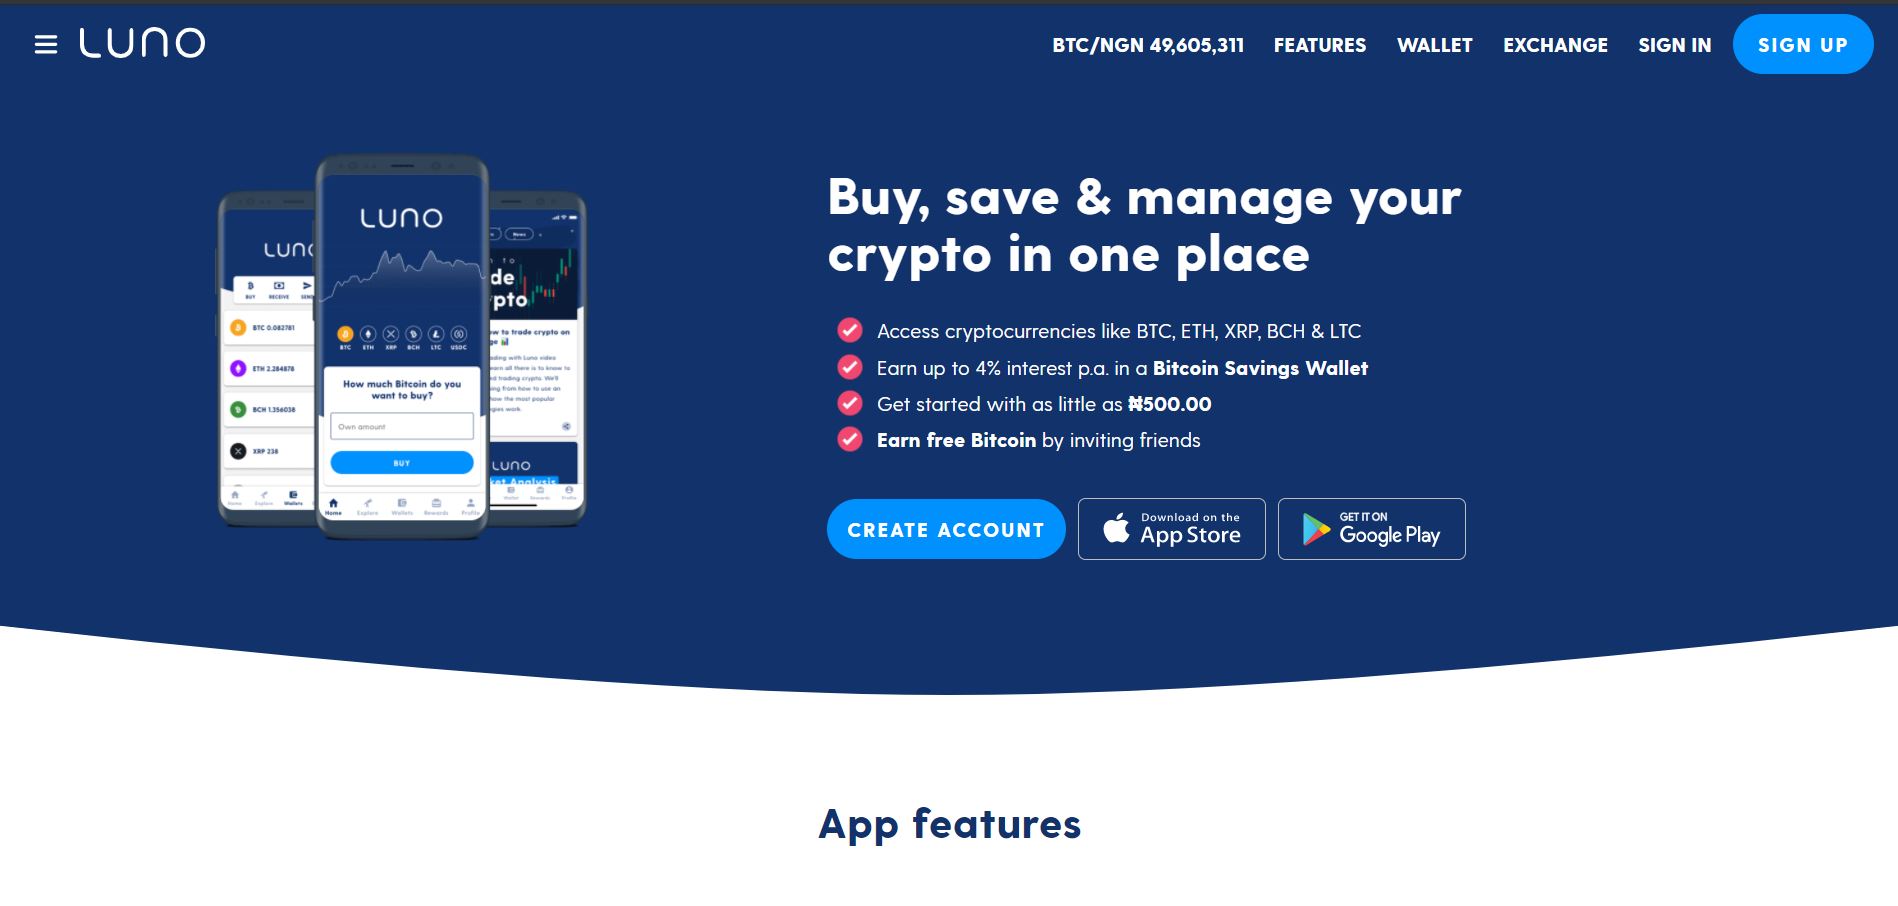 how to buy bitcoin on luno in nigeria